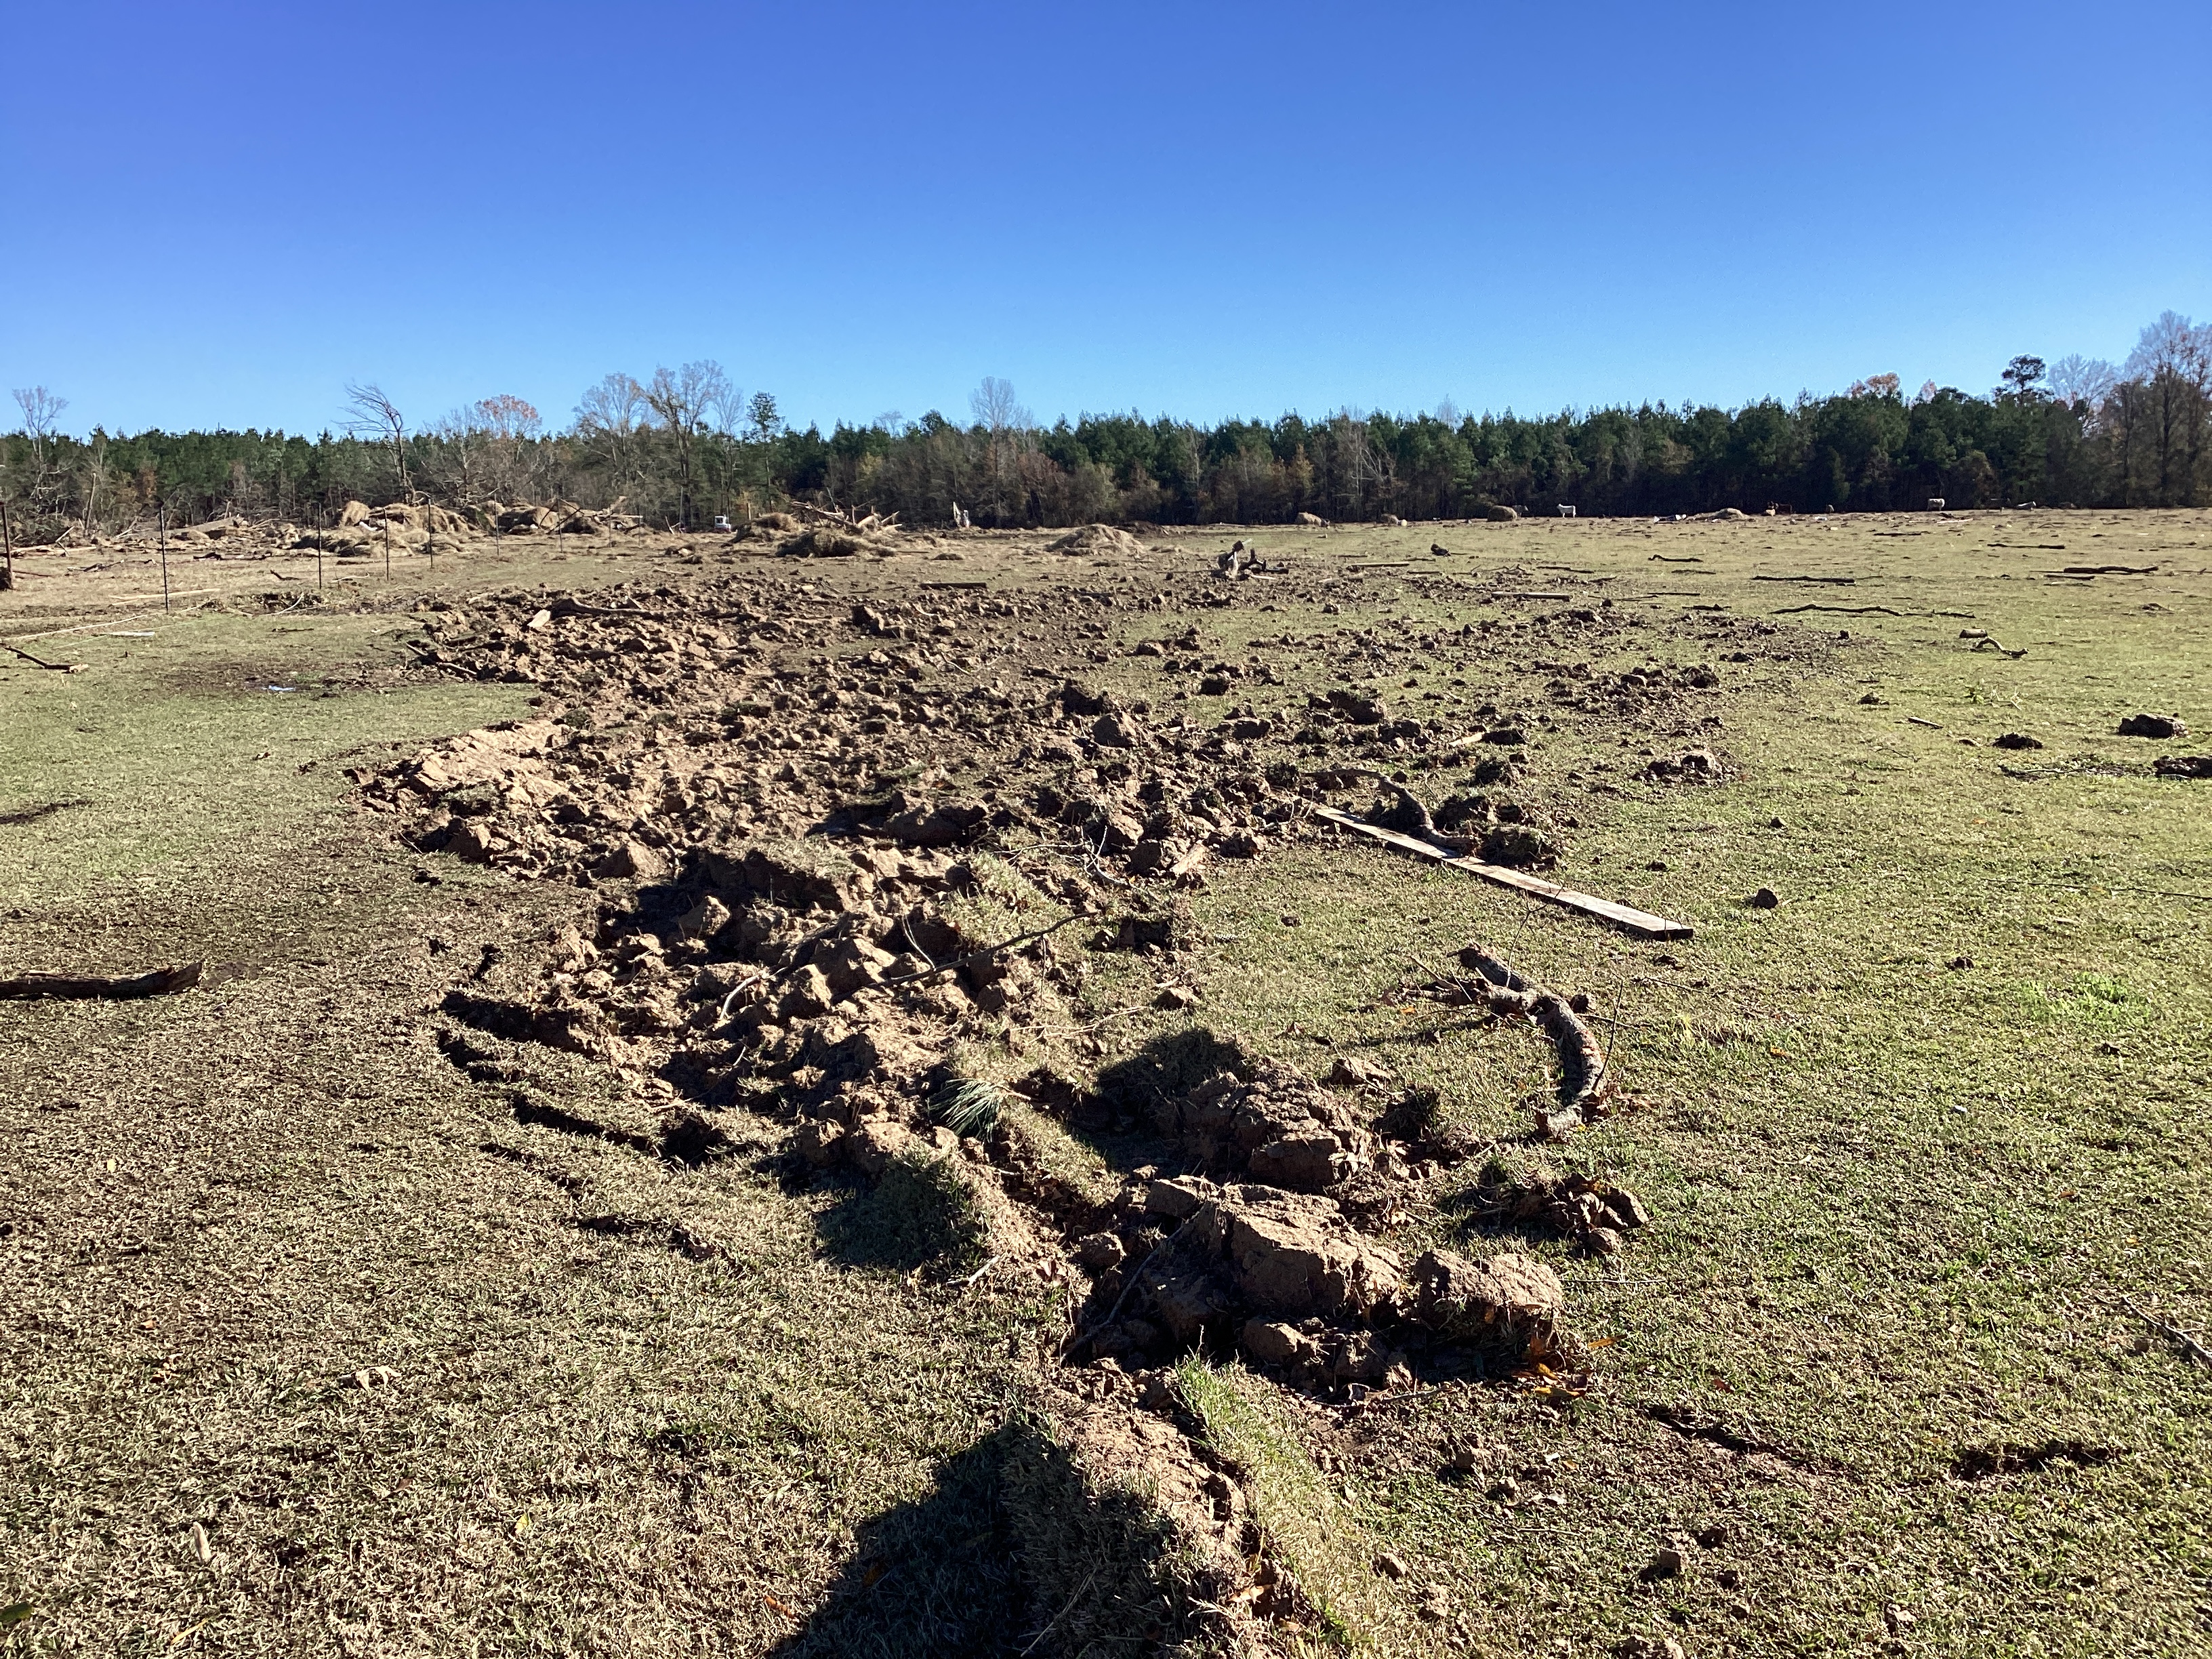 Ground scouring caused by an EF3 tornado south of Clarks, Louisiana